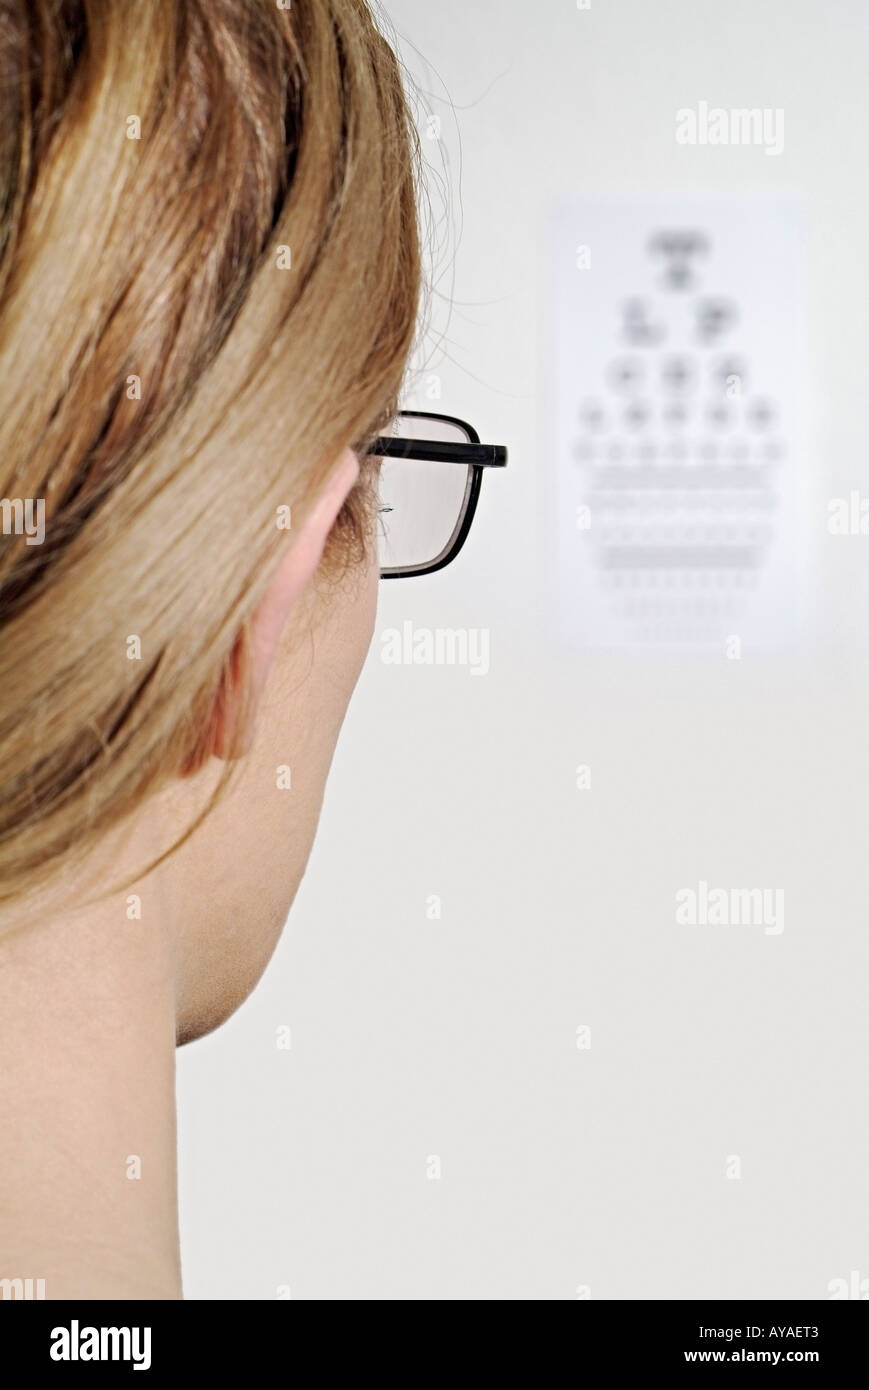 Woman Having Her Eye Sight With Spectacles Checked by Reading a Snellen Chart on an Opticians Wall Stock Photo